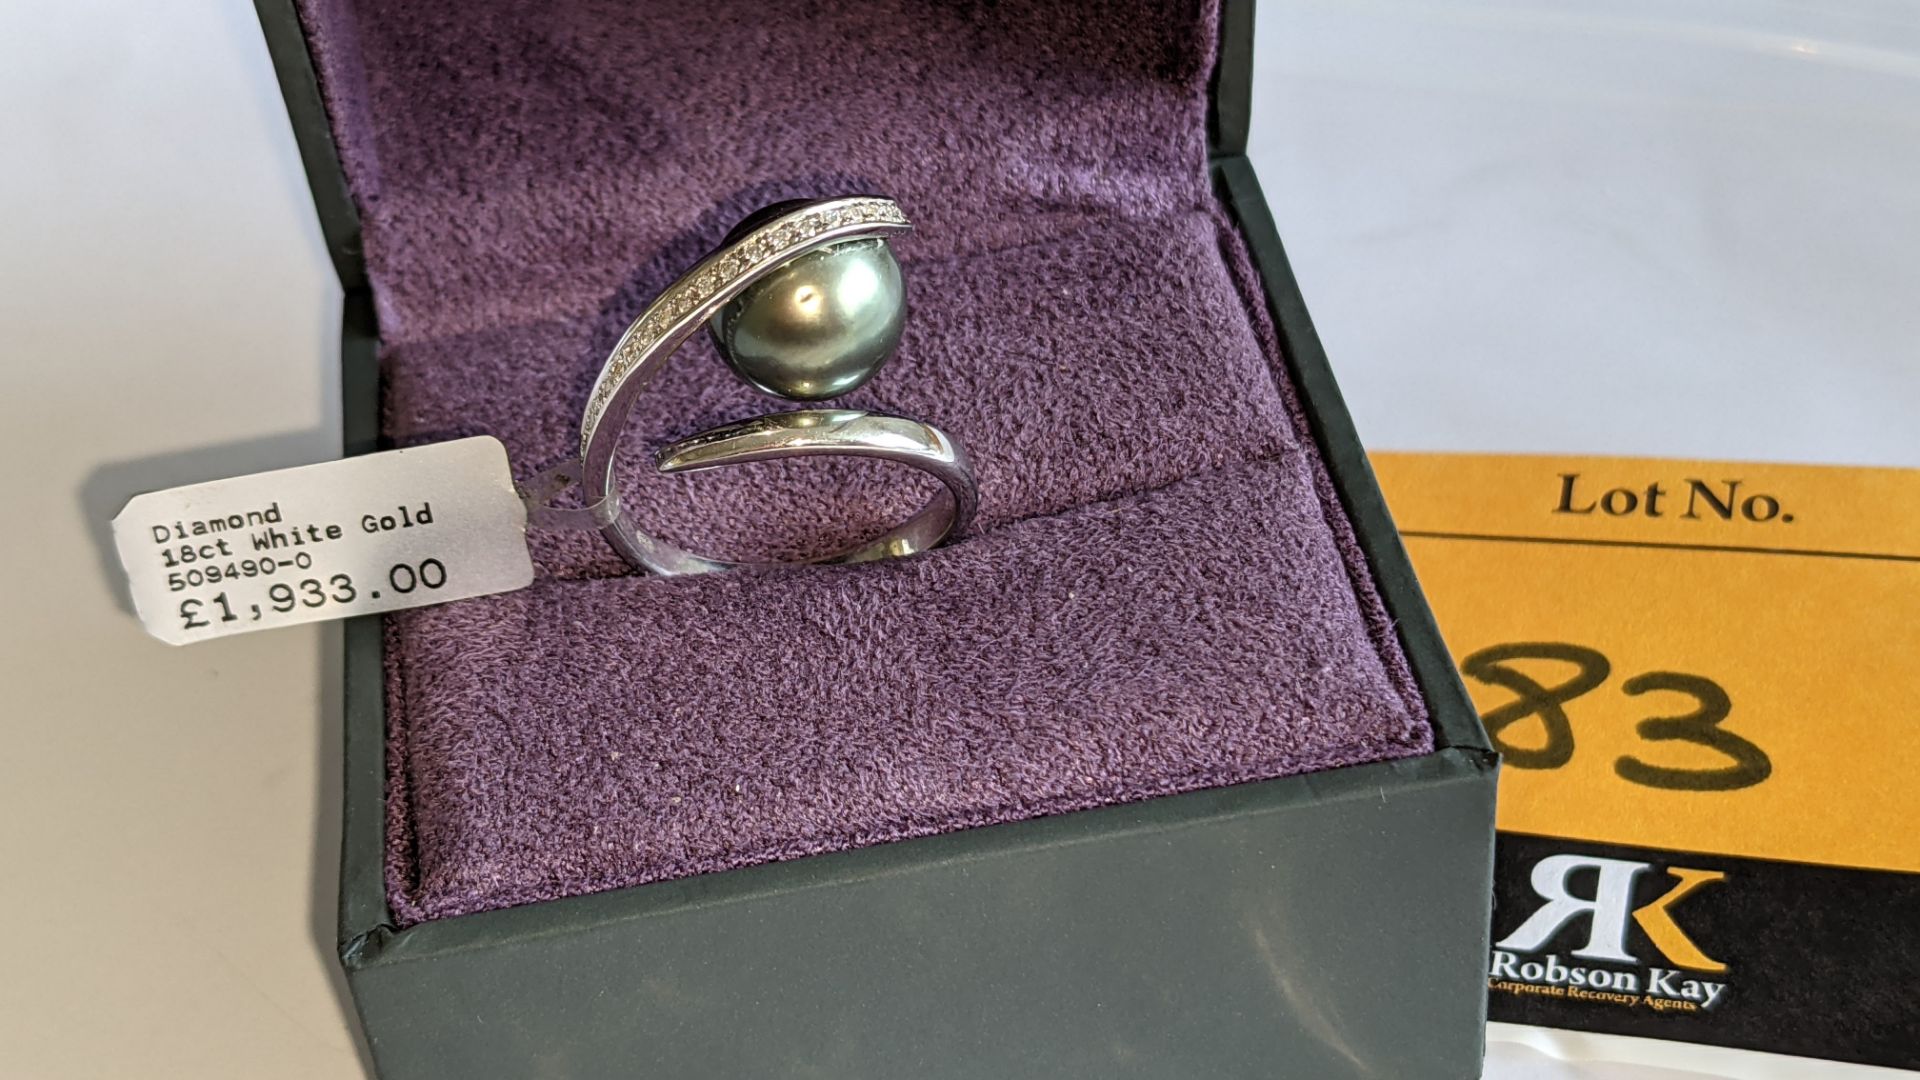 18ct white gold diamond & Tahitian pearl ring with 0.069ct of diamonds. RRP £1,933